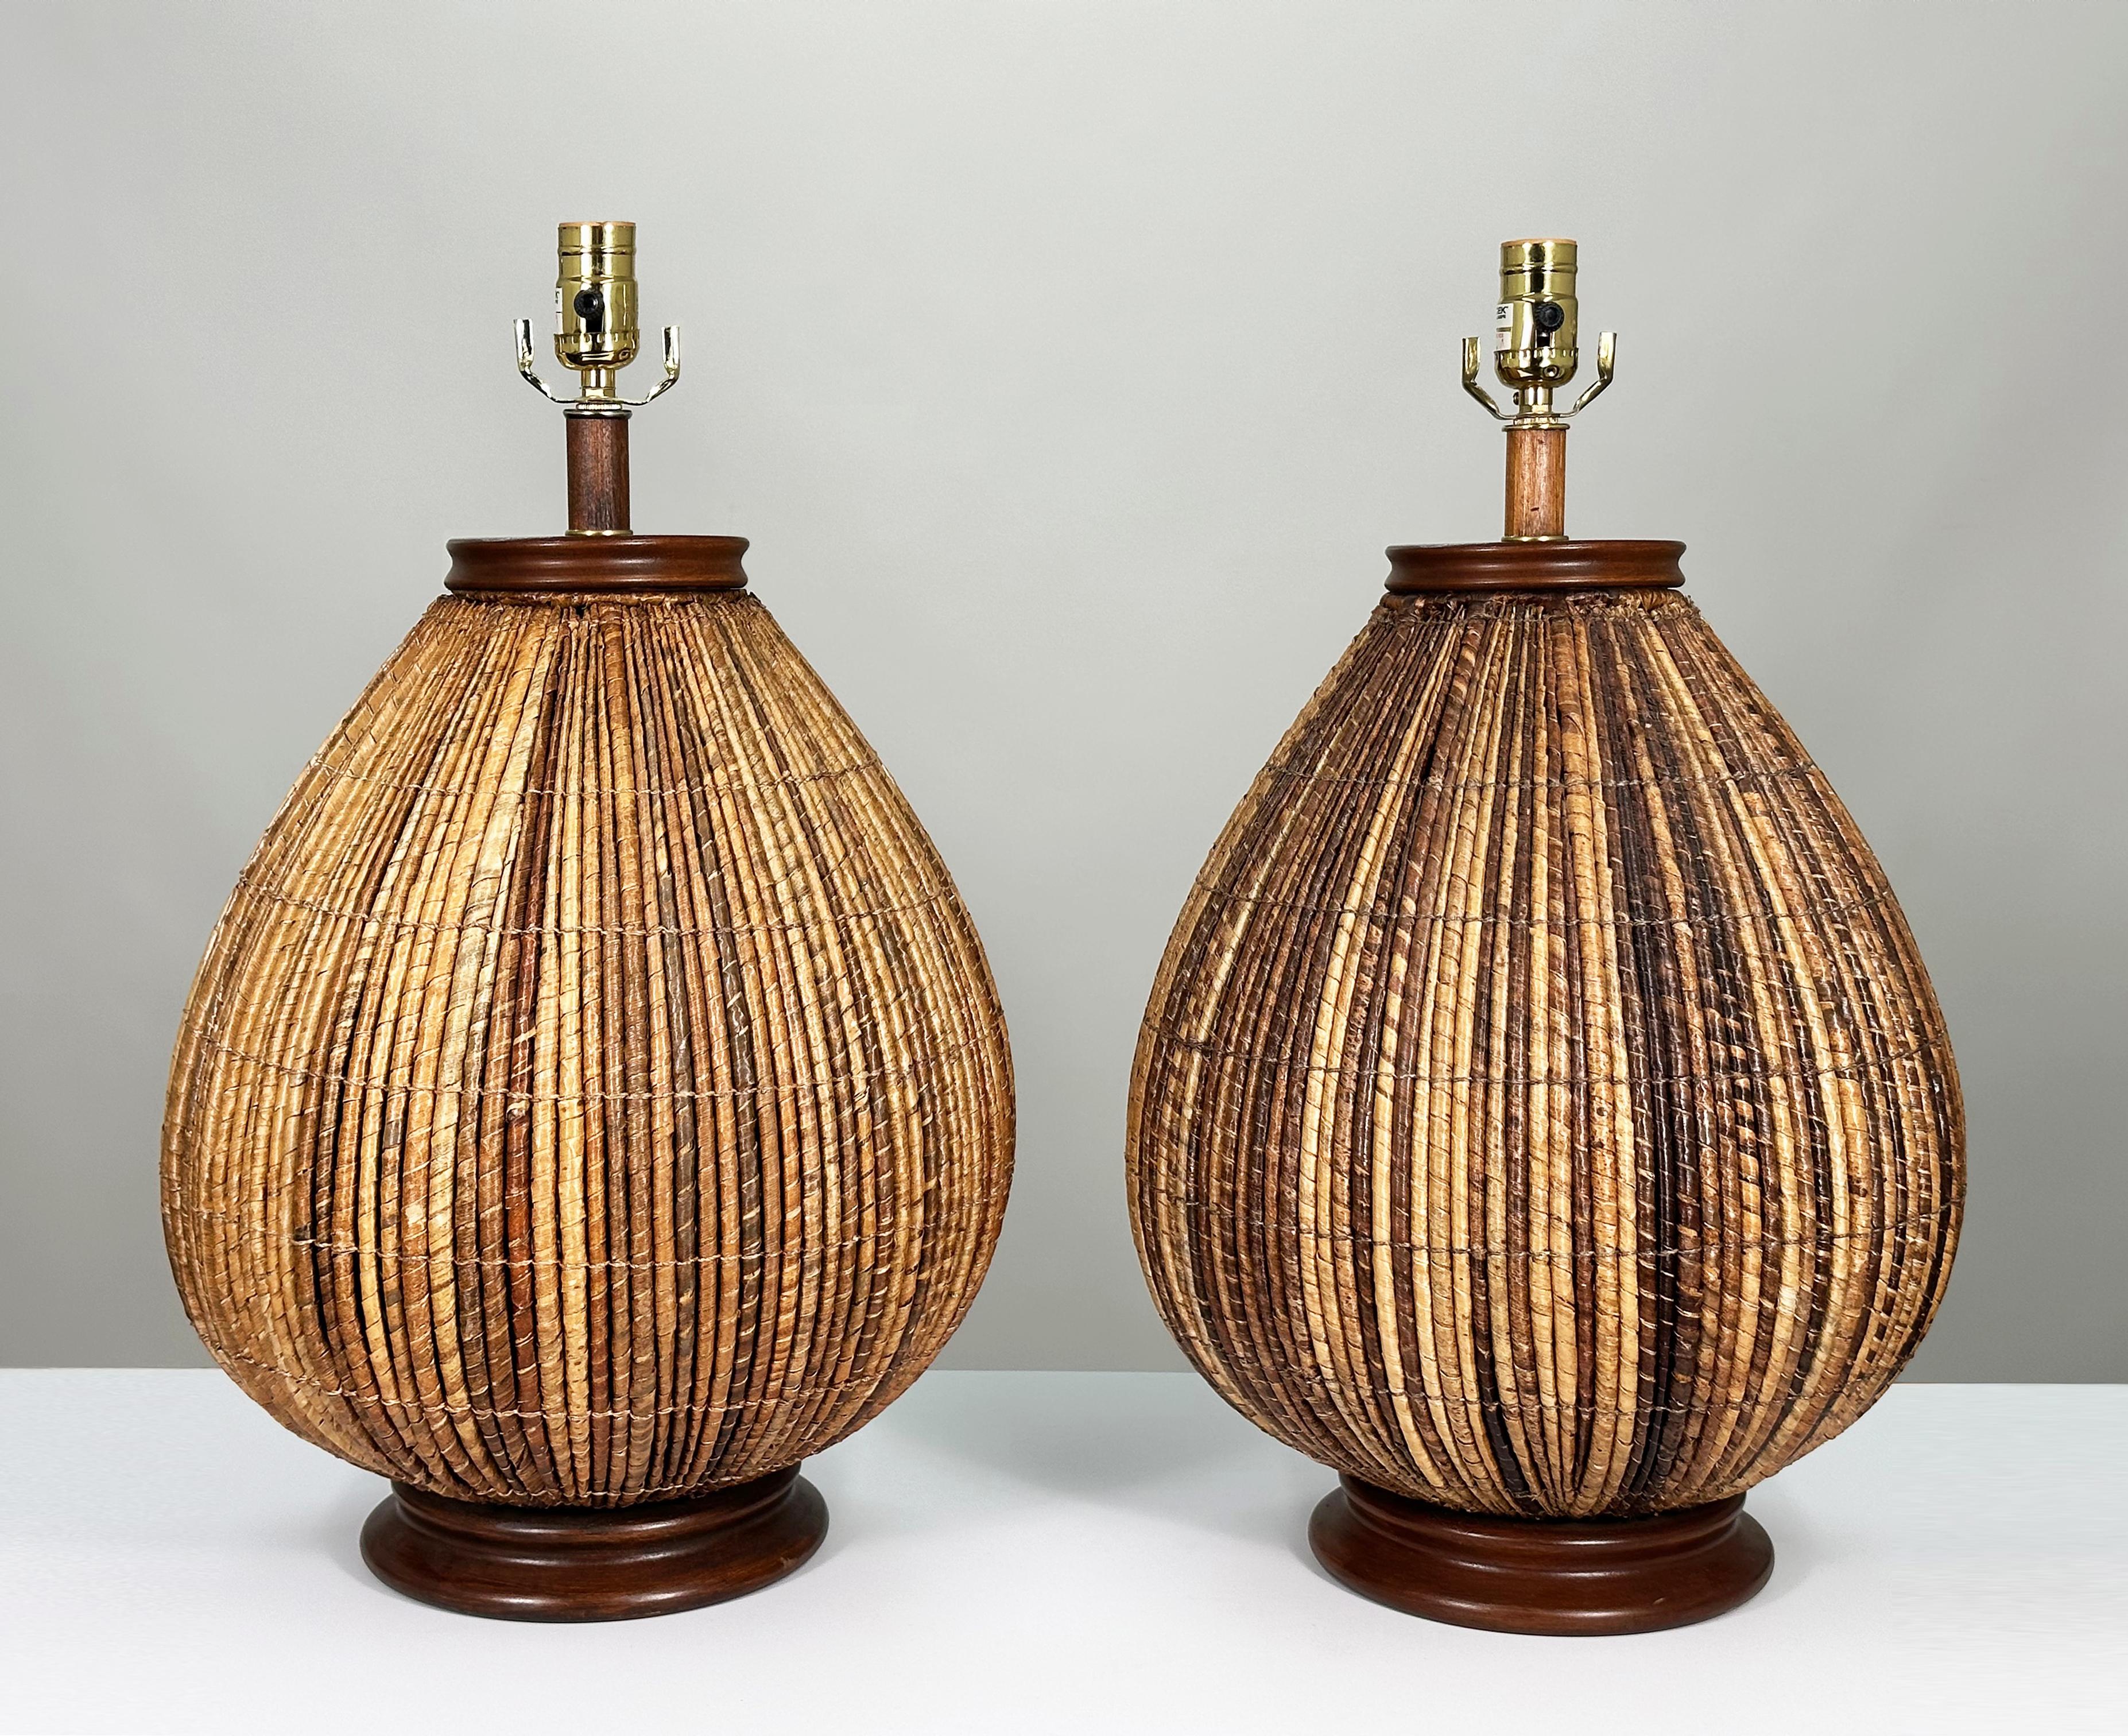 Exquisite early examples of Allan Palacek’s handcrafted rattan basketweave designs with high-contrast textural appeal, first introduced to the U.S. in San Francisco in 1974. 

After six years of piloting missions in Southeast Asia during the Vietnam